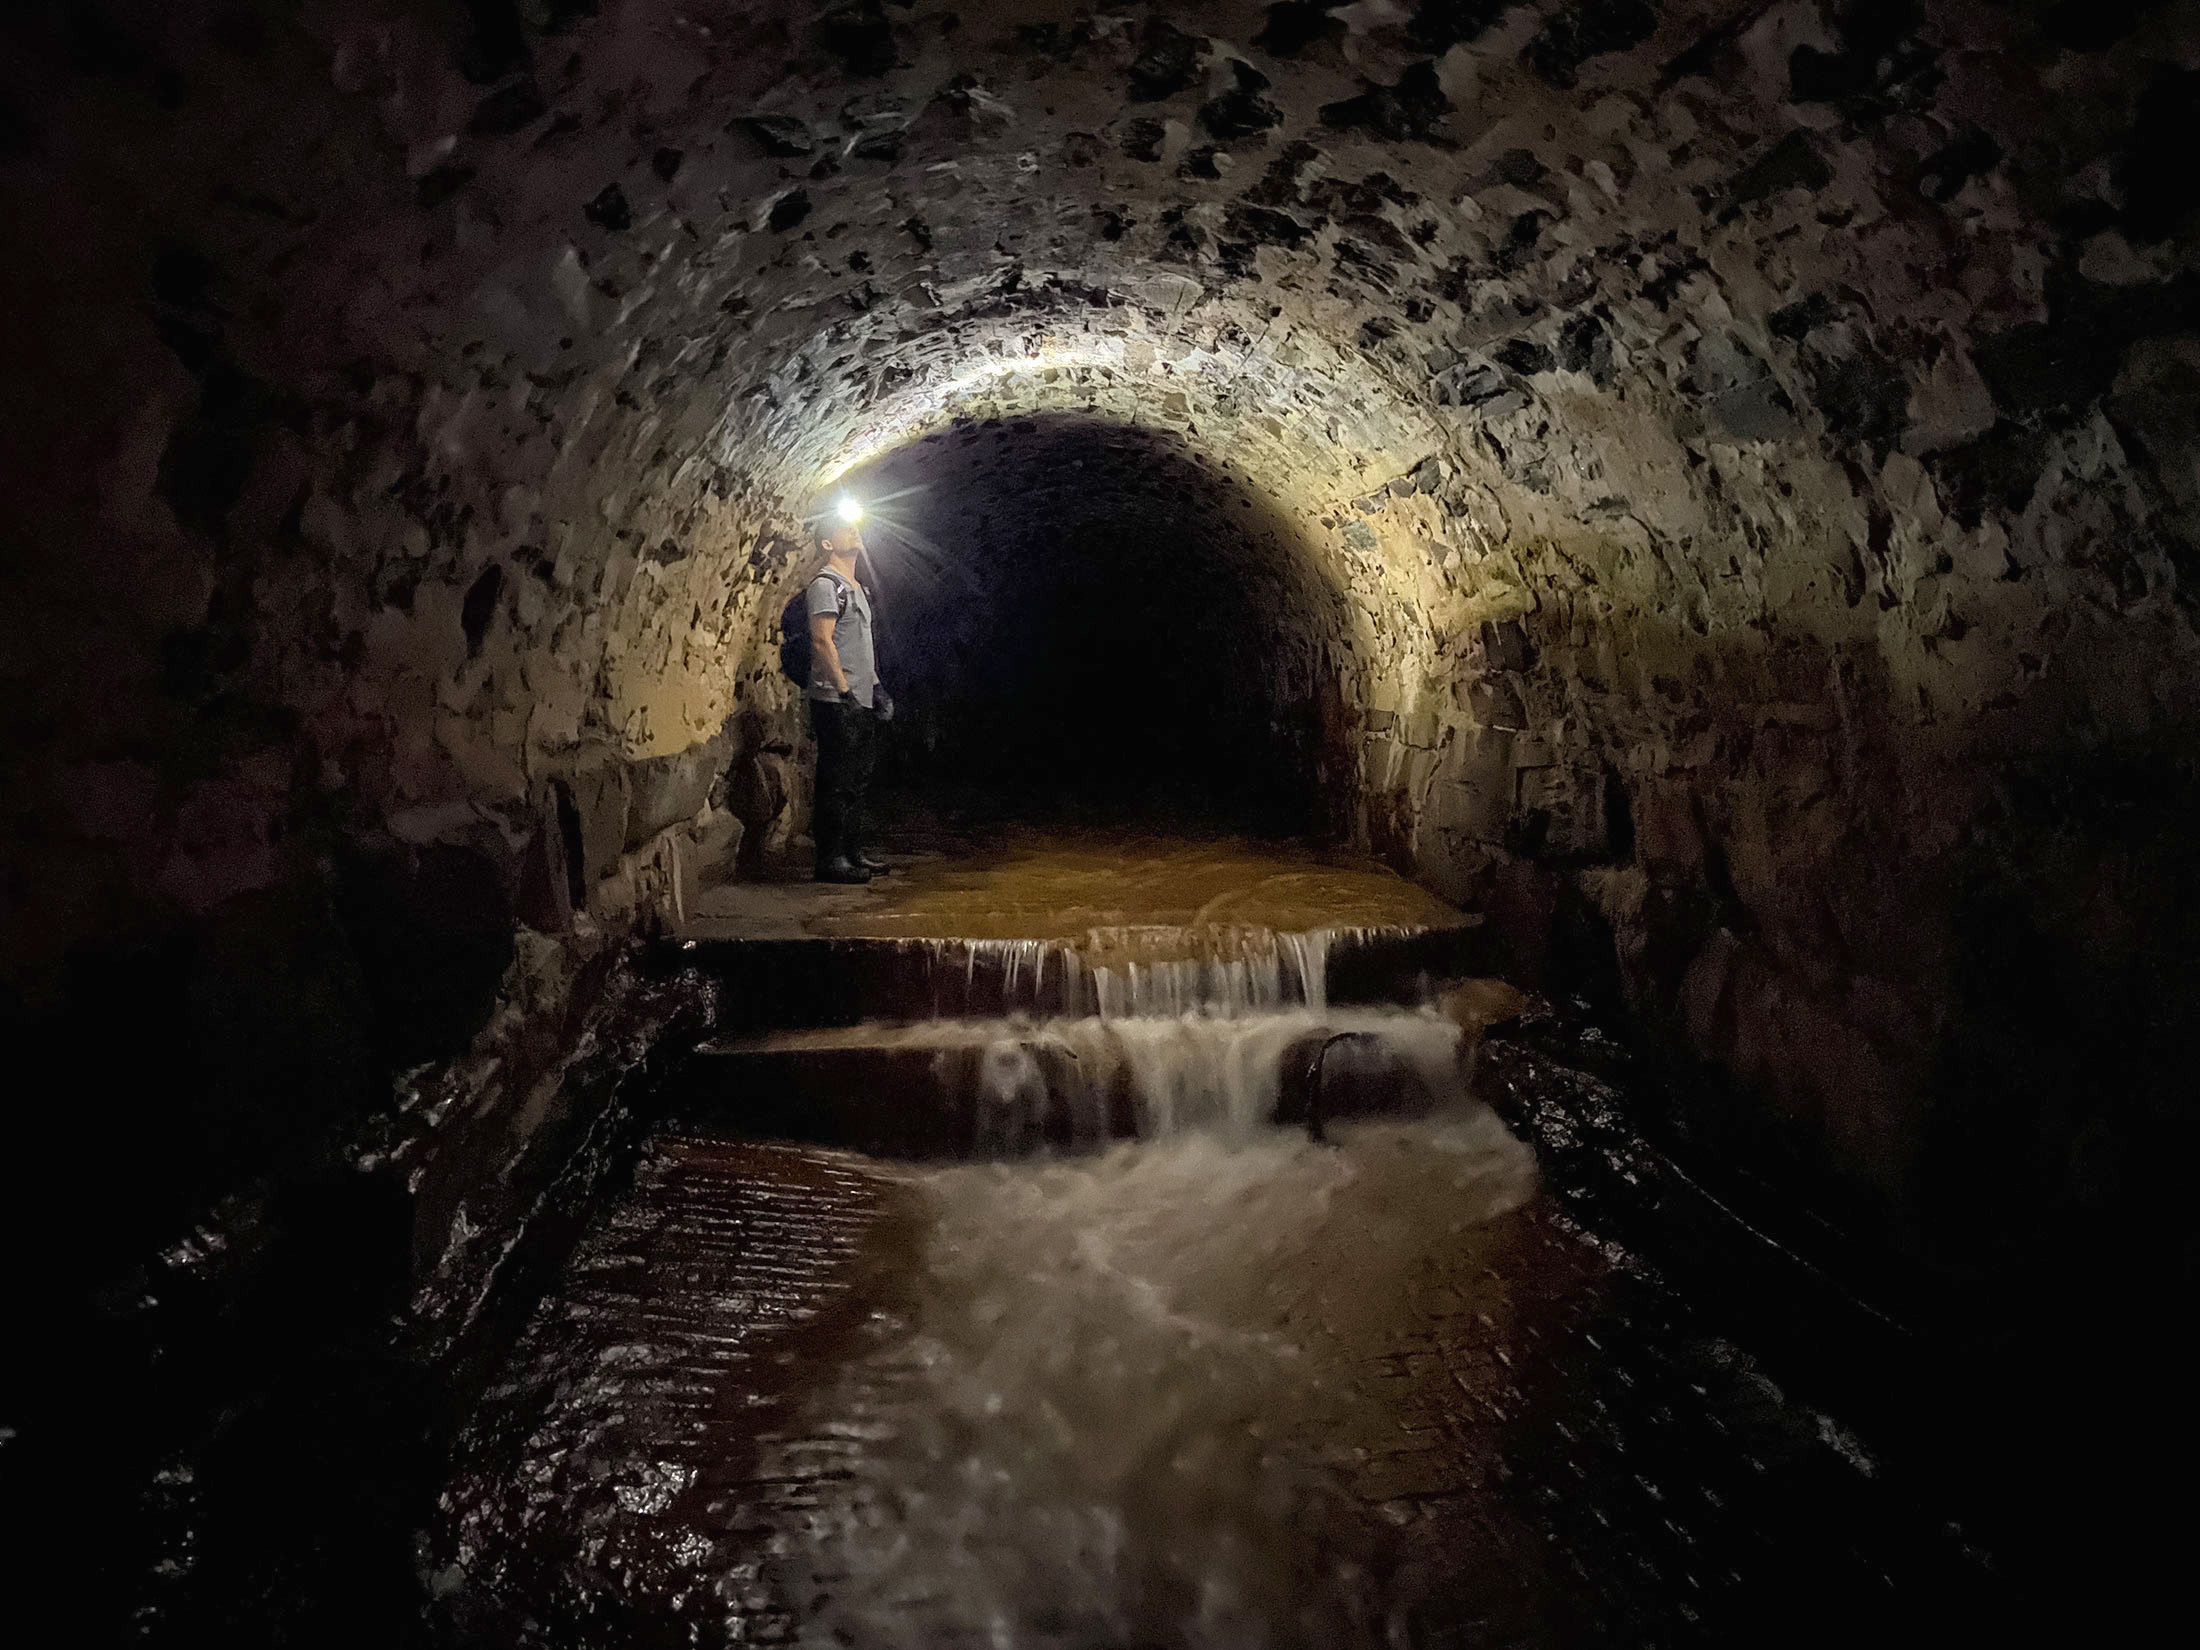 Photos of a man with a headlamp and waders standing in an underground tunnel with an arched stone ceiling. Water cascades through the tunnel down a set of steps.